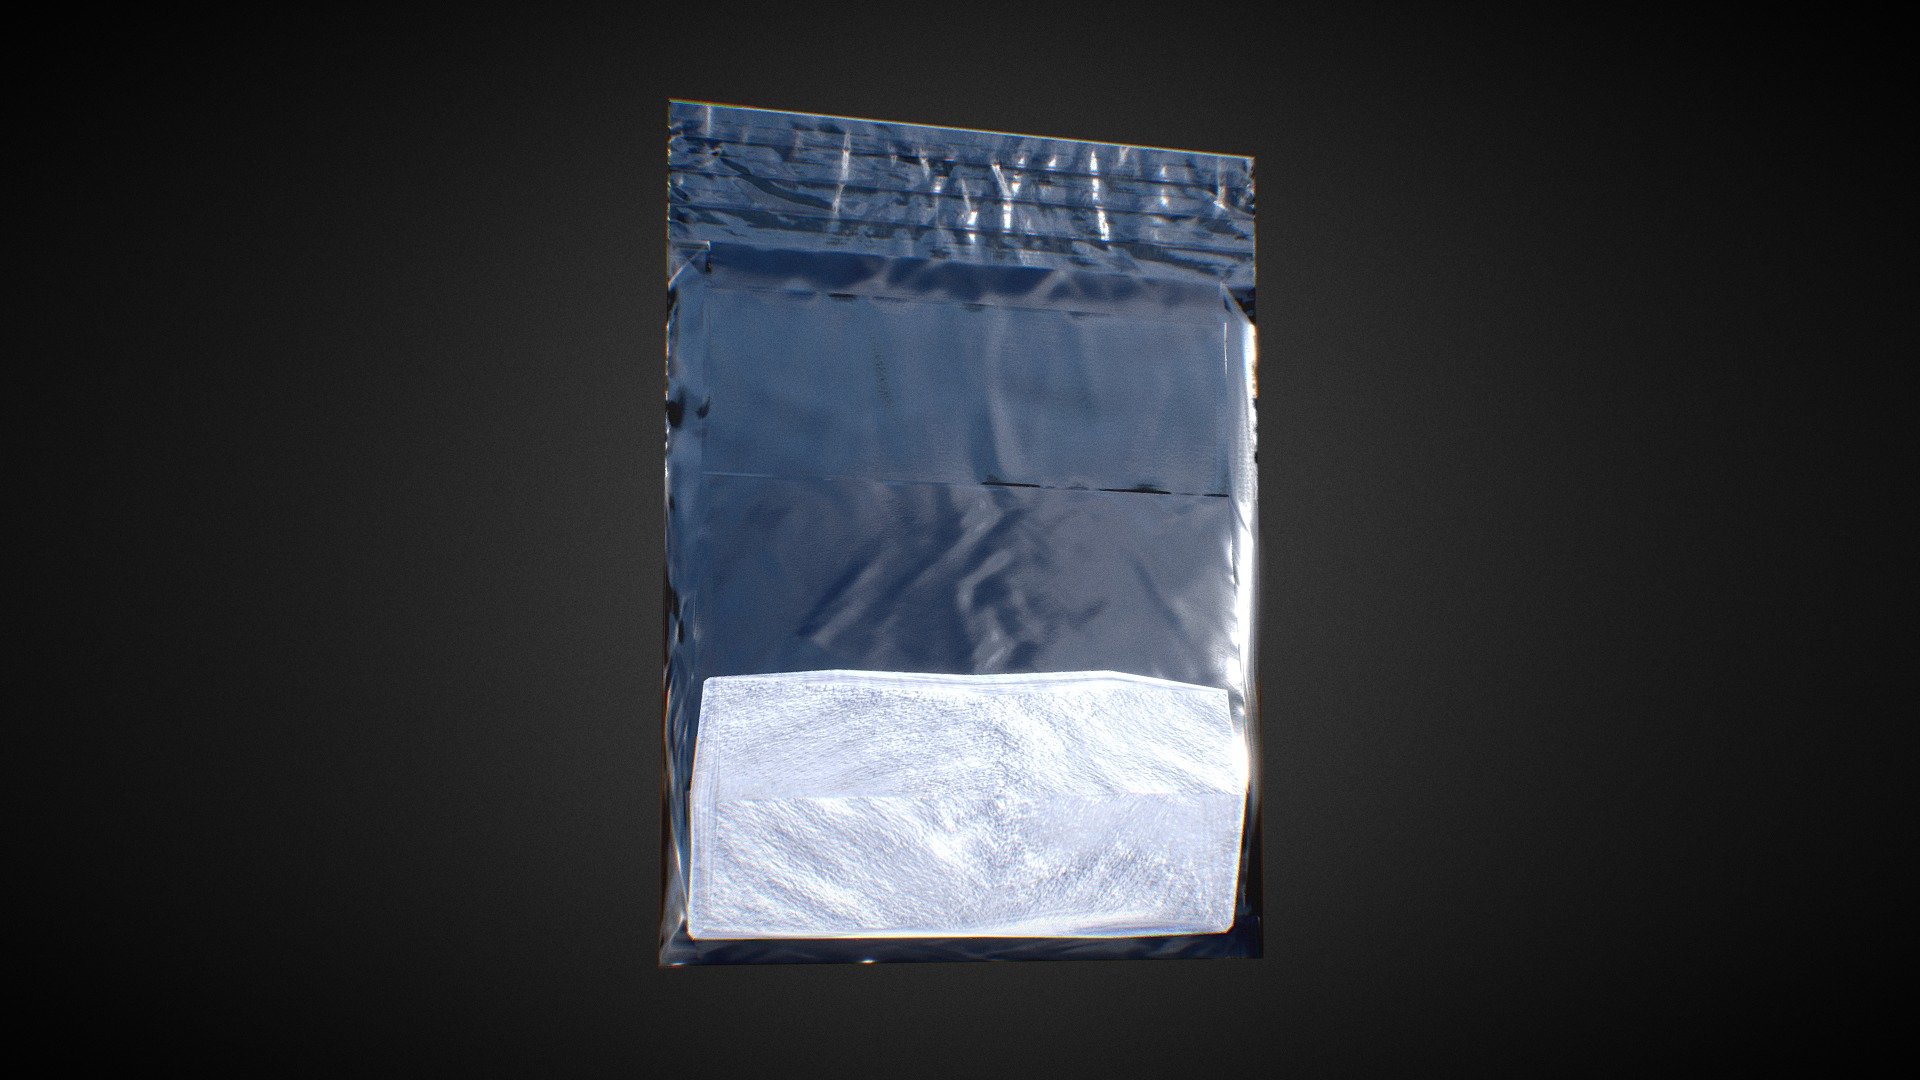 Links to social media and support: https://linktr.ee/tikodev

Get exclusive models and support me: patreon.com/tiko - Drug Baggie - Buy Royalty Free 3D model by Tiko (@tikoavp) 3d model